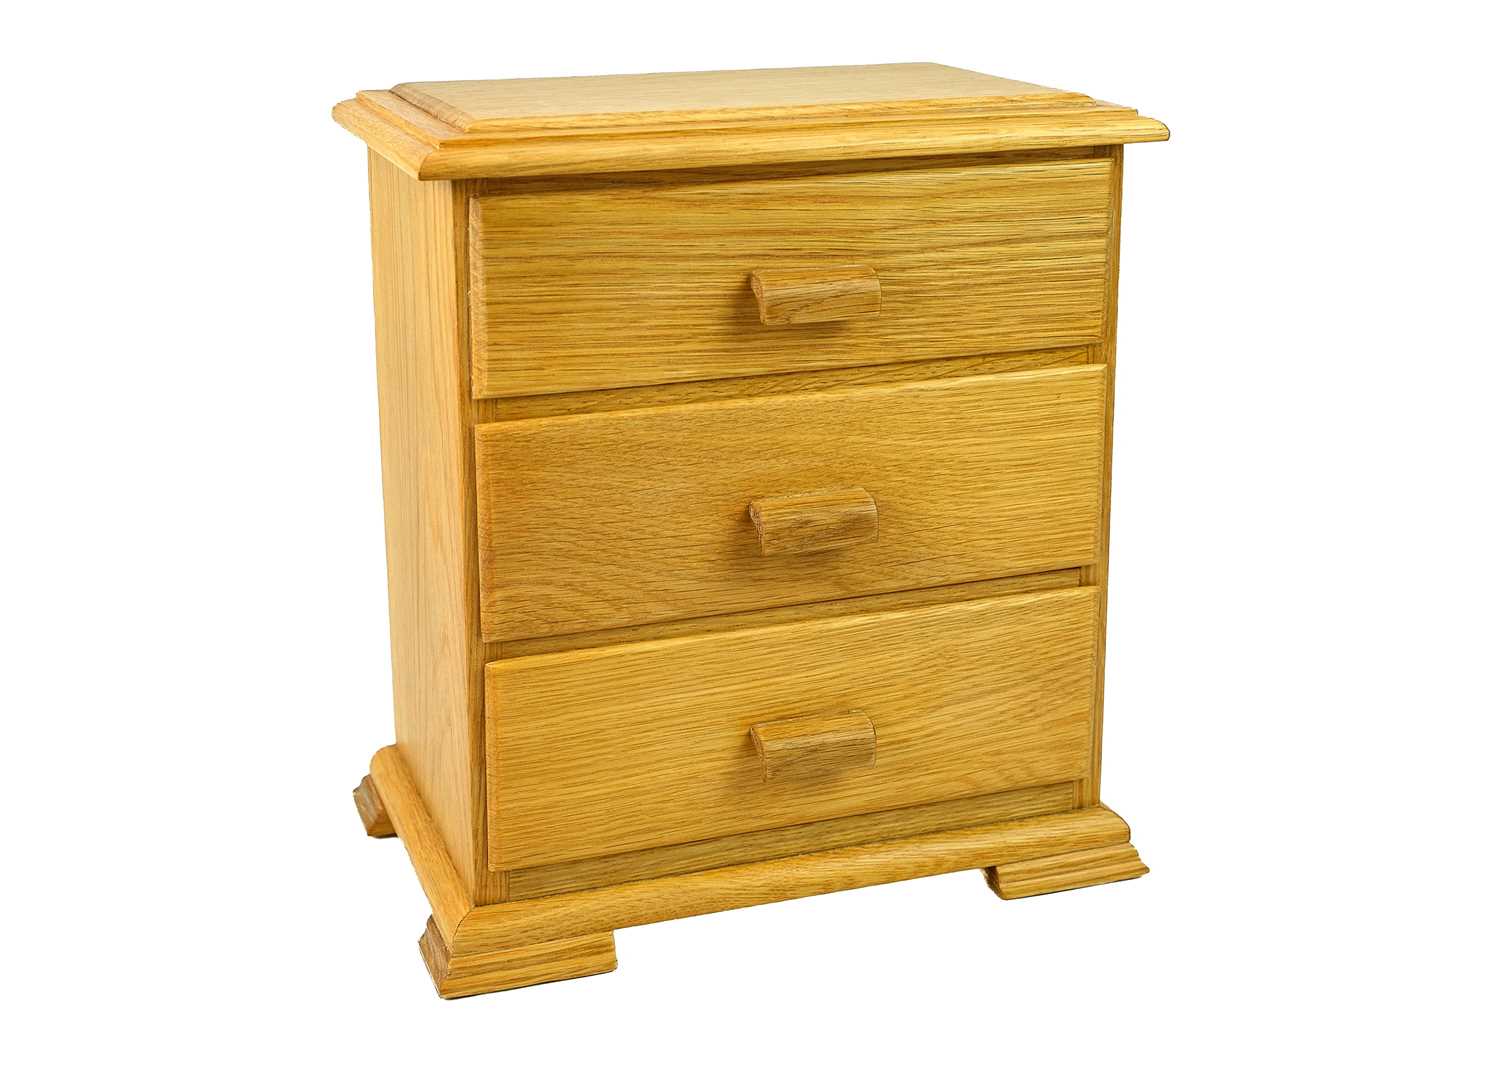 Prenntek Designs. An oak jewellery box in the form of a chest of drawers